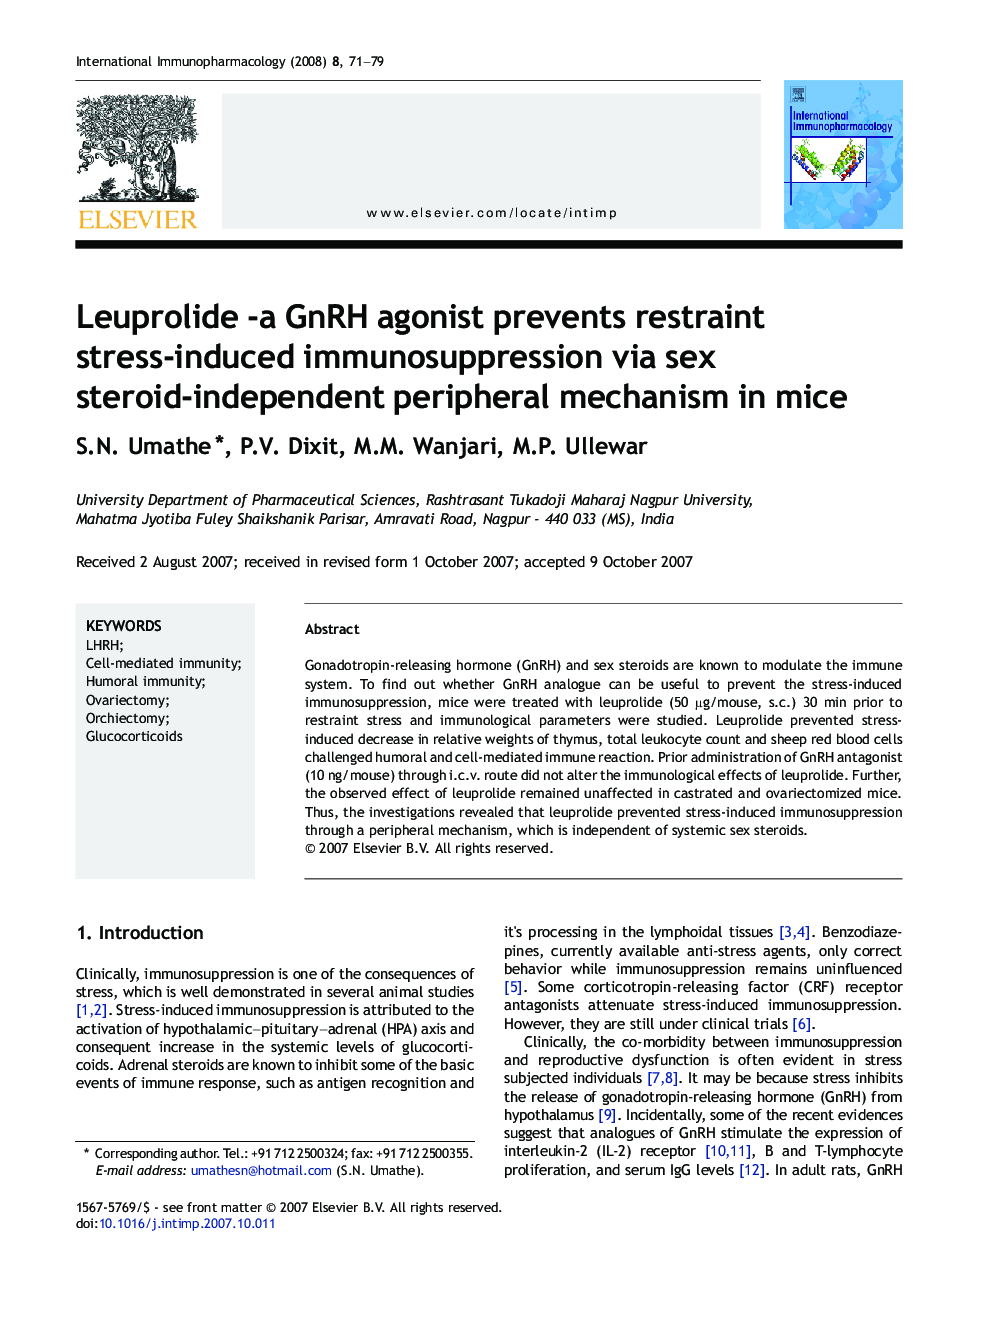 Leuprolide -a GnRH agonist prevents restraint stress-induced immunosuppression via sex steroid-independent peripheral mechanism in mice